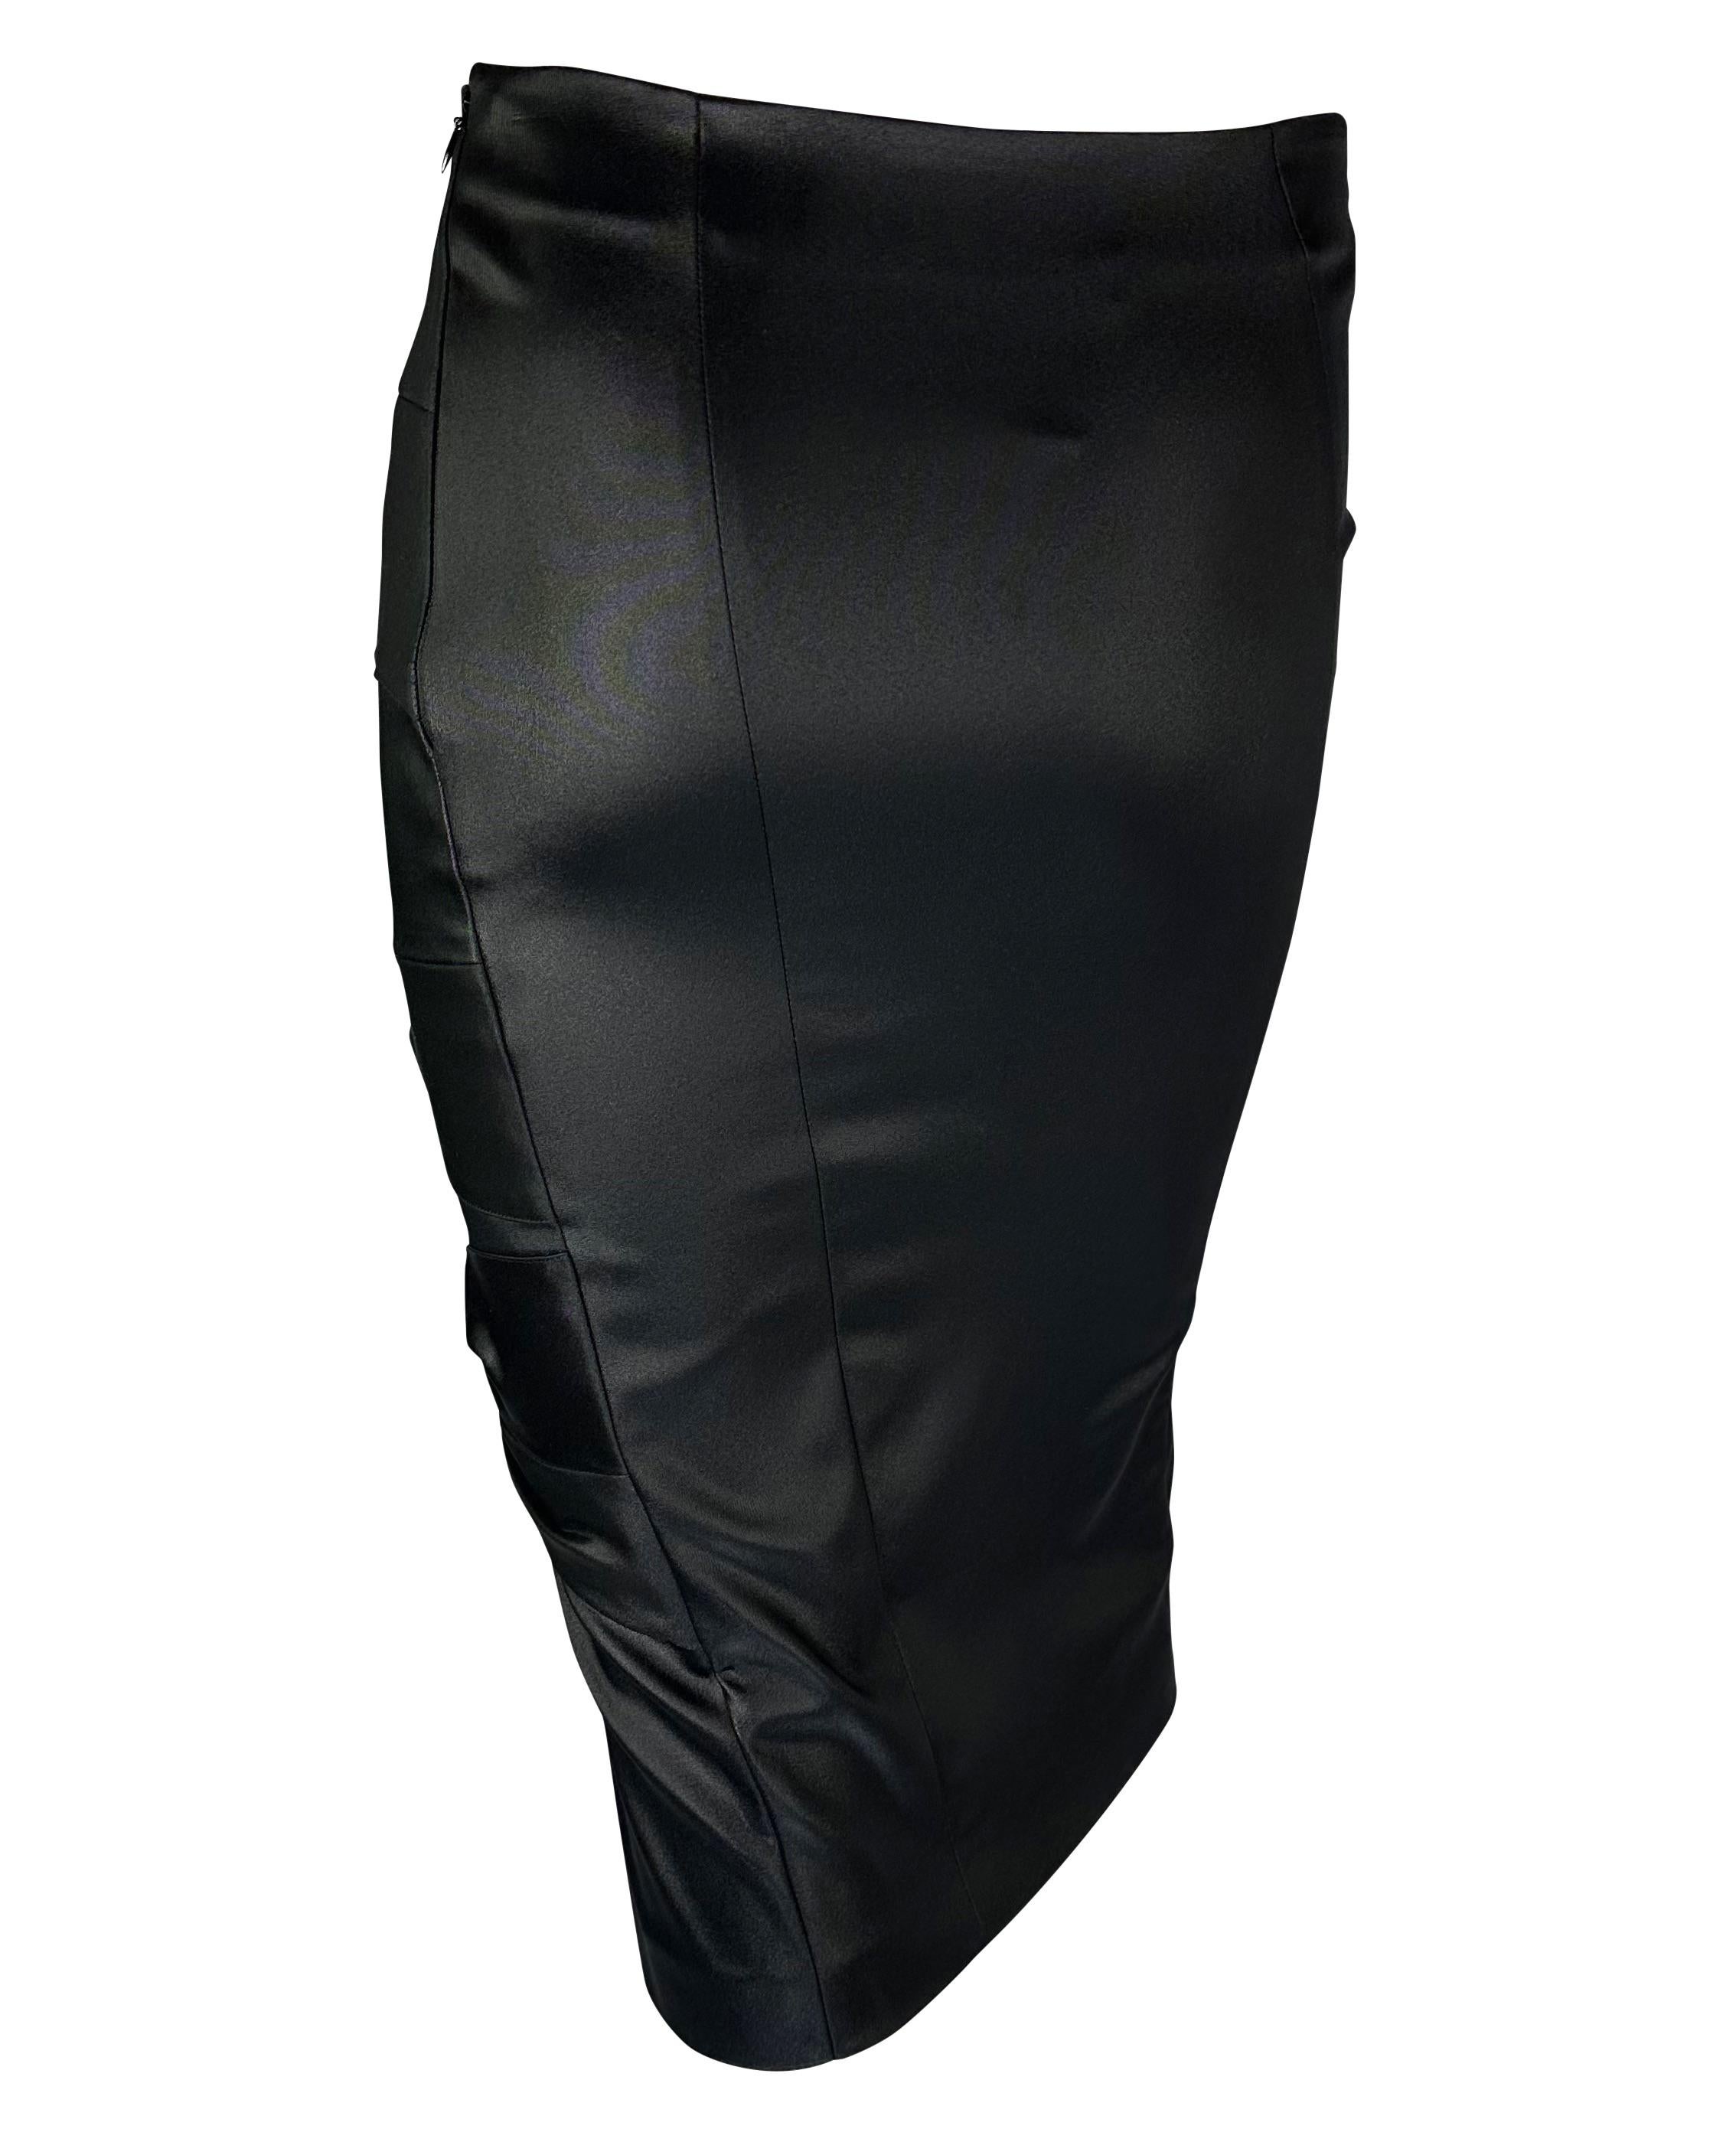 F/W 2003 Christian Dior by John Galliano Tie Accent Bodycon Stretch Skirt For Sale 1